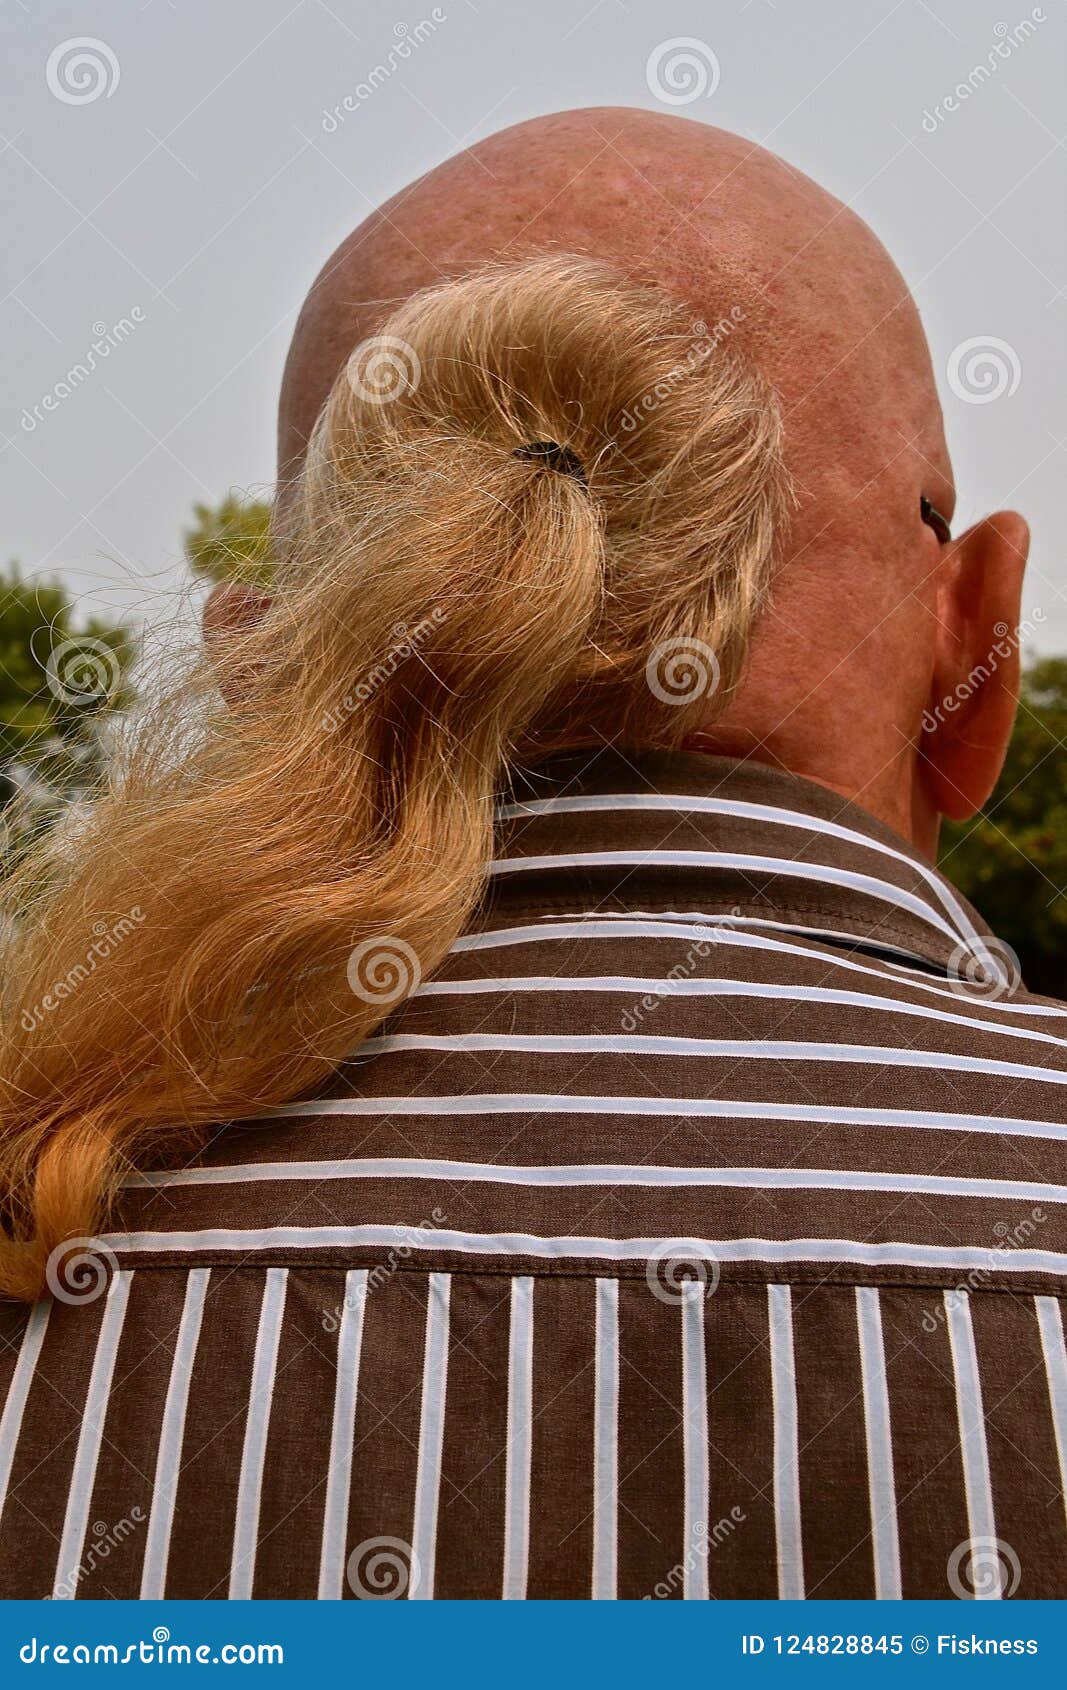 Ponytail On A Bald Adult Man Editorial Image - Image of 